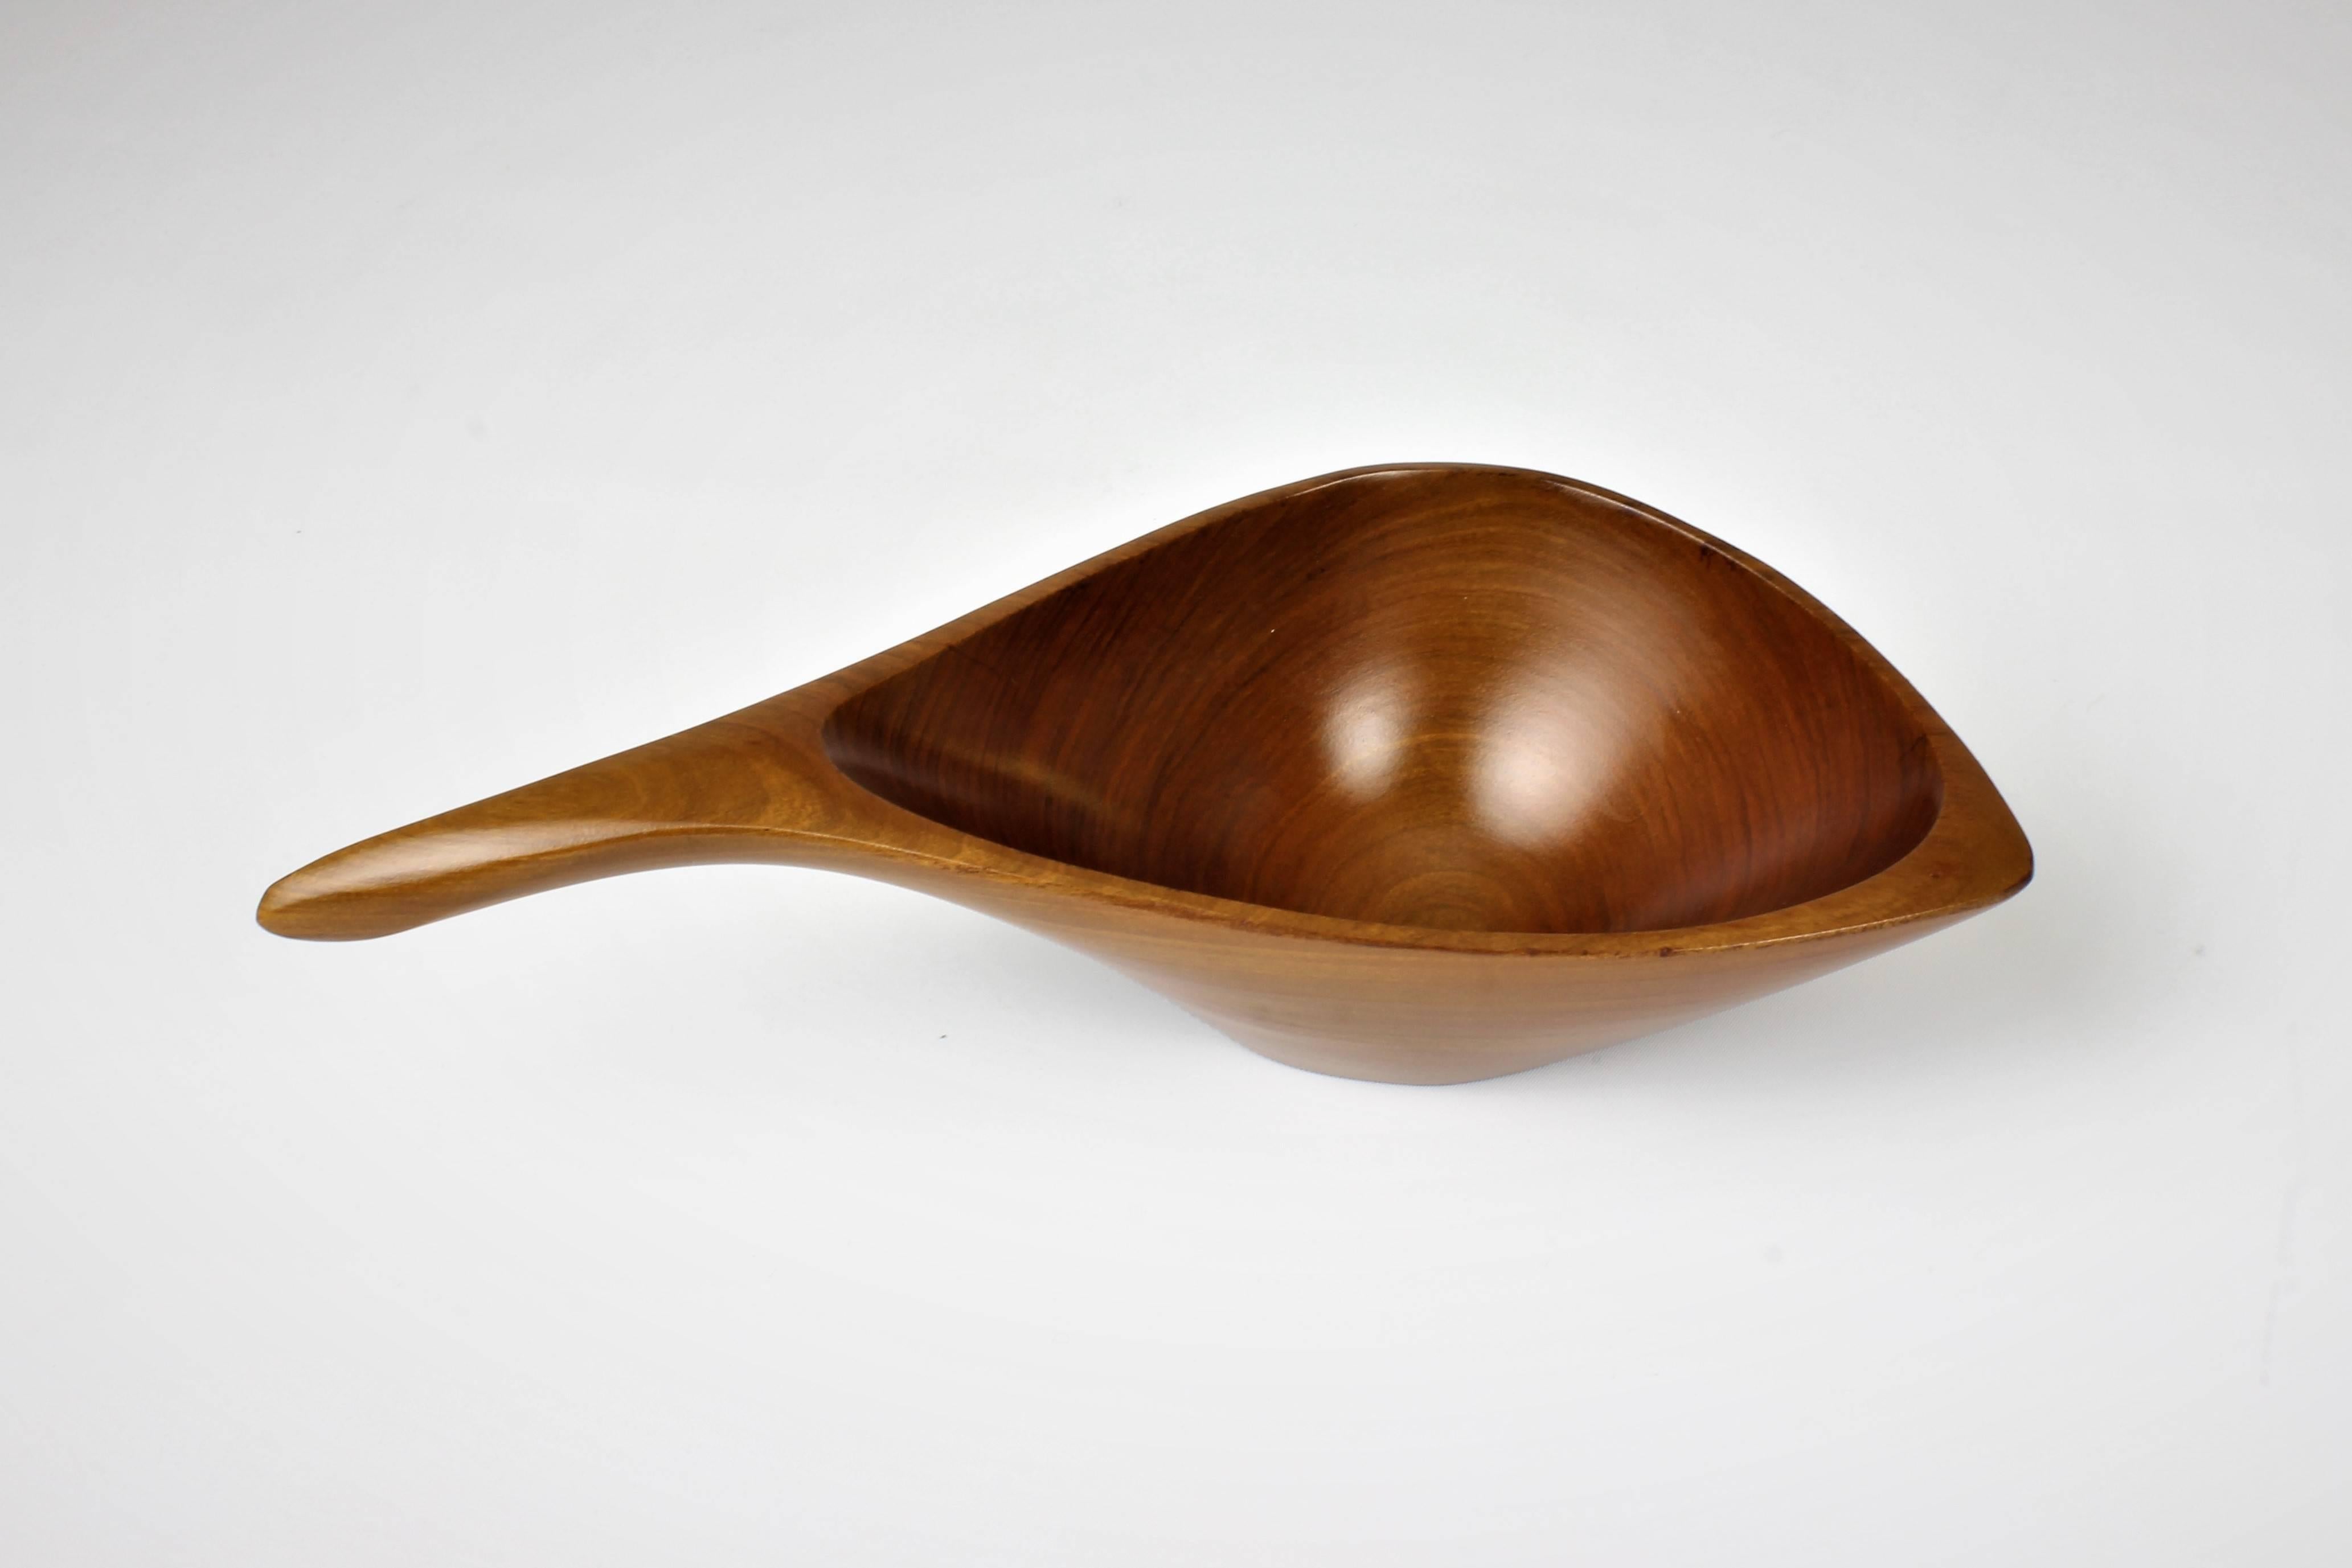 Emil Milan handmade decorative and functional nut bowl in Lapacho Wood, 1970s. 

 Emil Milan (May 17, 1922-April 5, 1985) was an American woodworker known for his carved bowls, birds, and other accessories and art in wood. Trained as a sculptor at